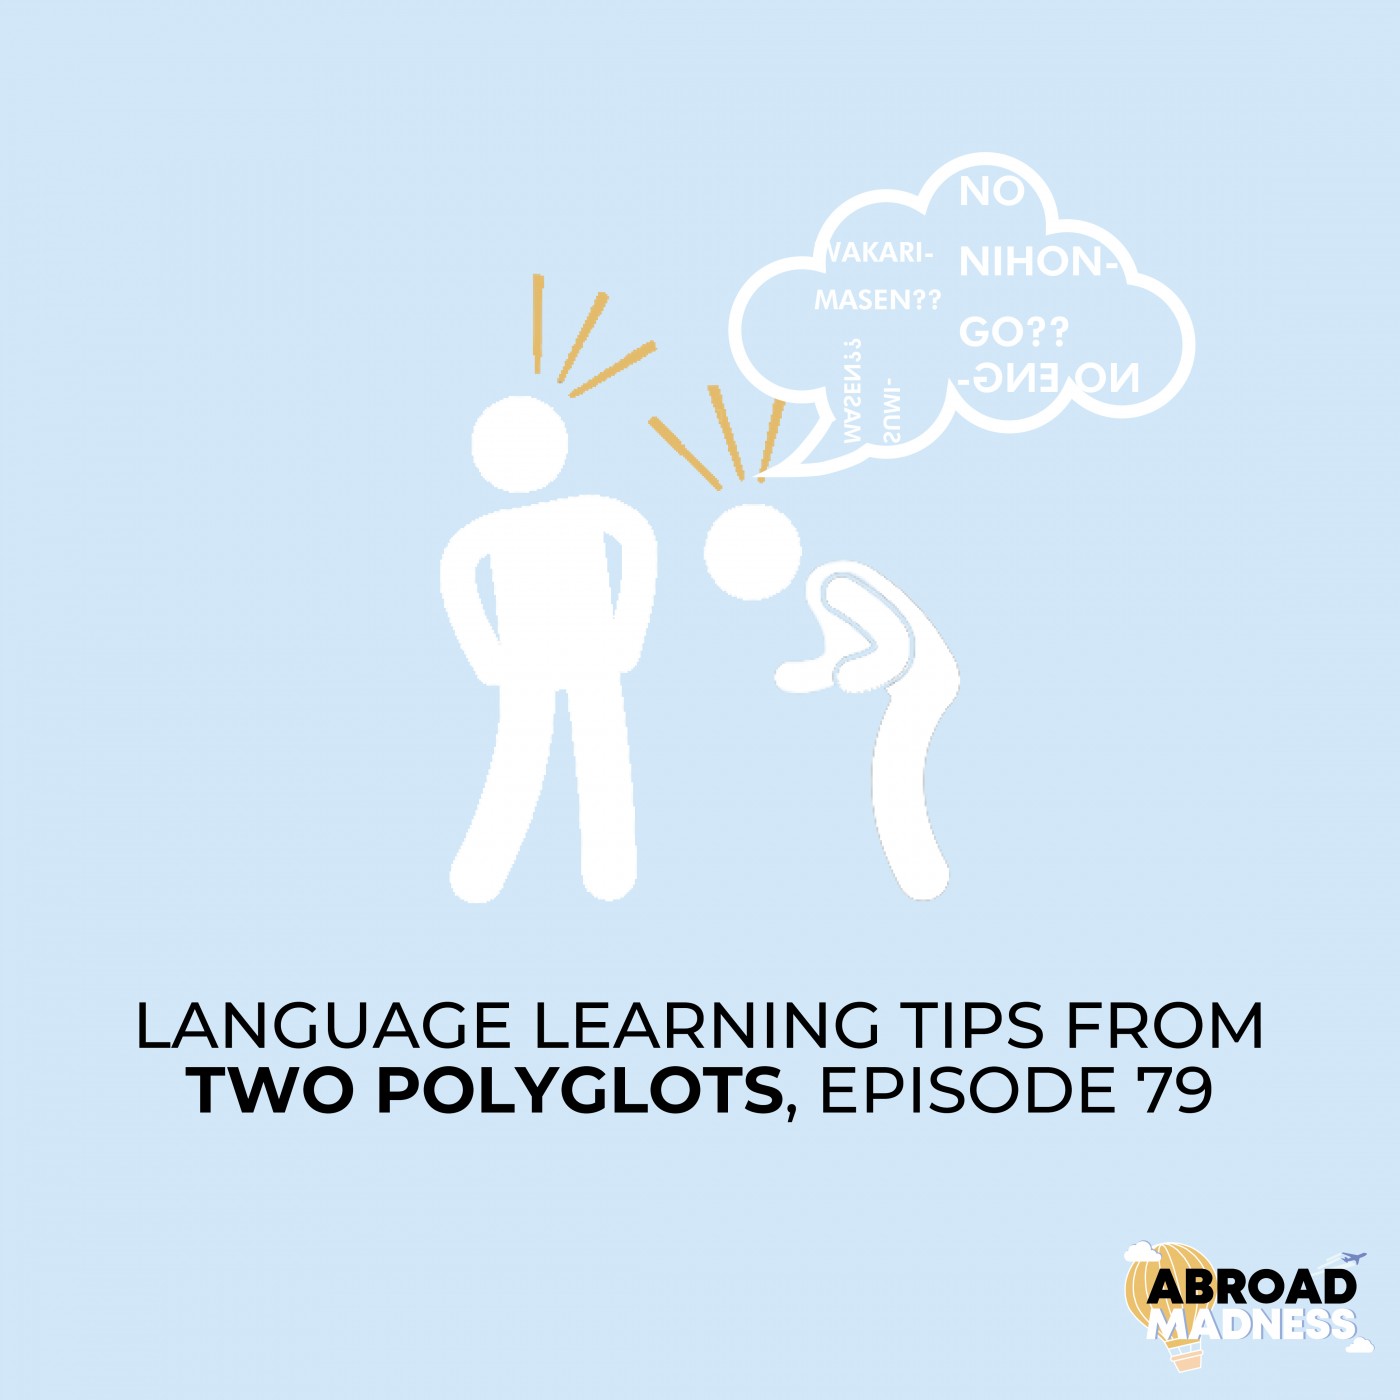 Language learning tips from two polyglots, Episode 79